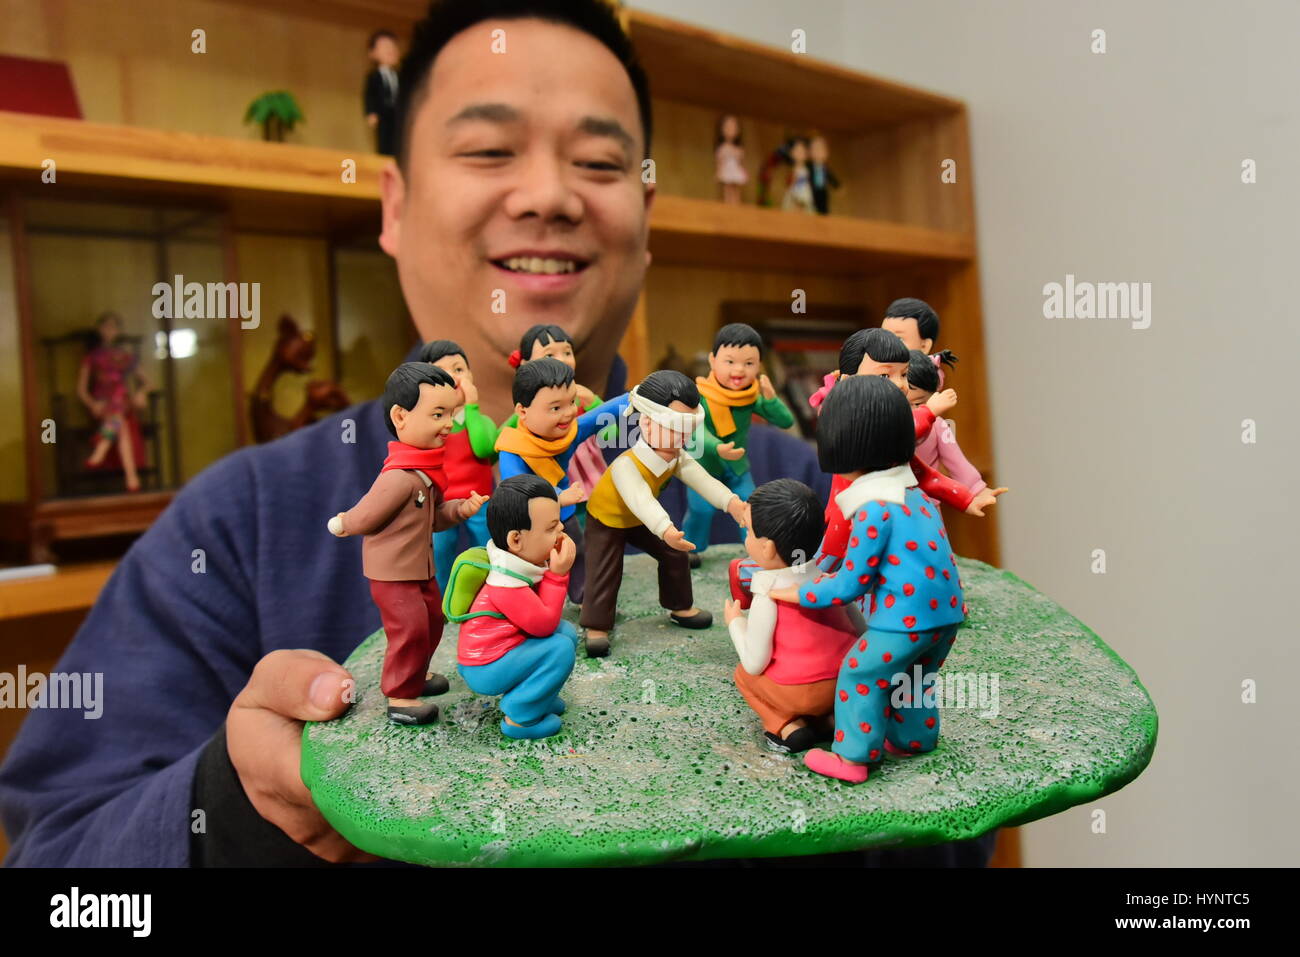 Zhengzhou, Zhengzhou, China. 5th Apr, 2017. Zhengzhou, CHINA-April 5 2017: (EDITORIAL USE ONLY. CHINA OUT) The folk artist Jia Guanghui shows his handmade clay figurines in Zhengzhou, central China's Henan Province, April 5th, 2017. Jia has been making clay figurines for twenty years, creating vivid figurines of celebrities including Jackie Chan, Barack and Michelle Obama. Jia also made figurines of characters in Chinese classic literature works including Dream of the Red Chamber and Heroes of the Marshes. Credit: SIPA Asia/ZUMA Wire/Alamy Live News Stock Photo